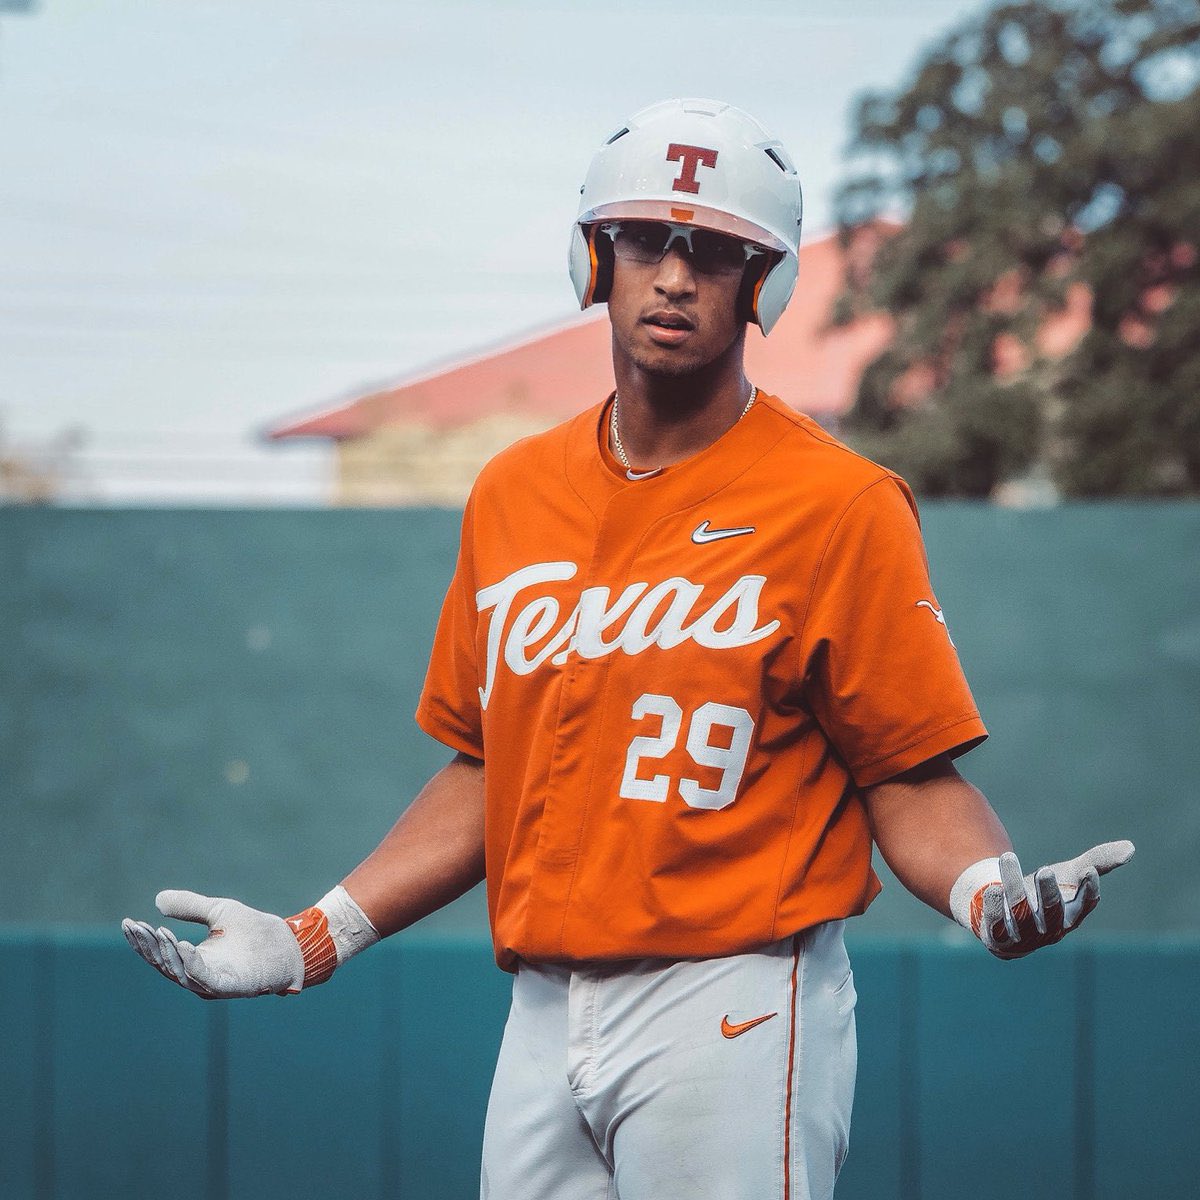 We’re gonna see a lot more of this guy in ‘23! Also, what’s taking February 17th so long? #29 days until Texas Baseball … #LFTexas | #Austin2Omaha 🤘🏼⚾️